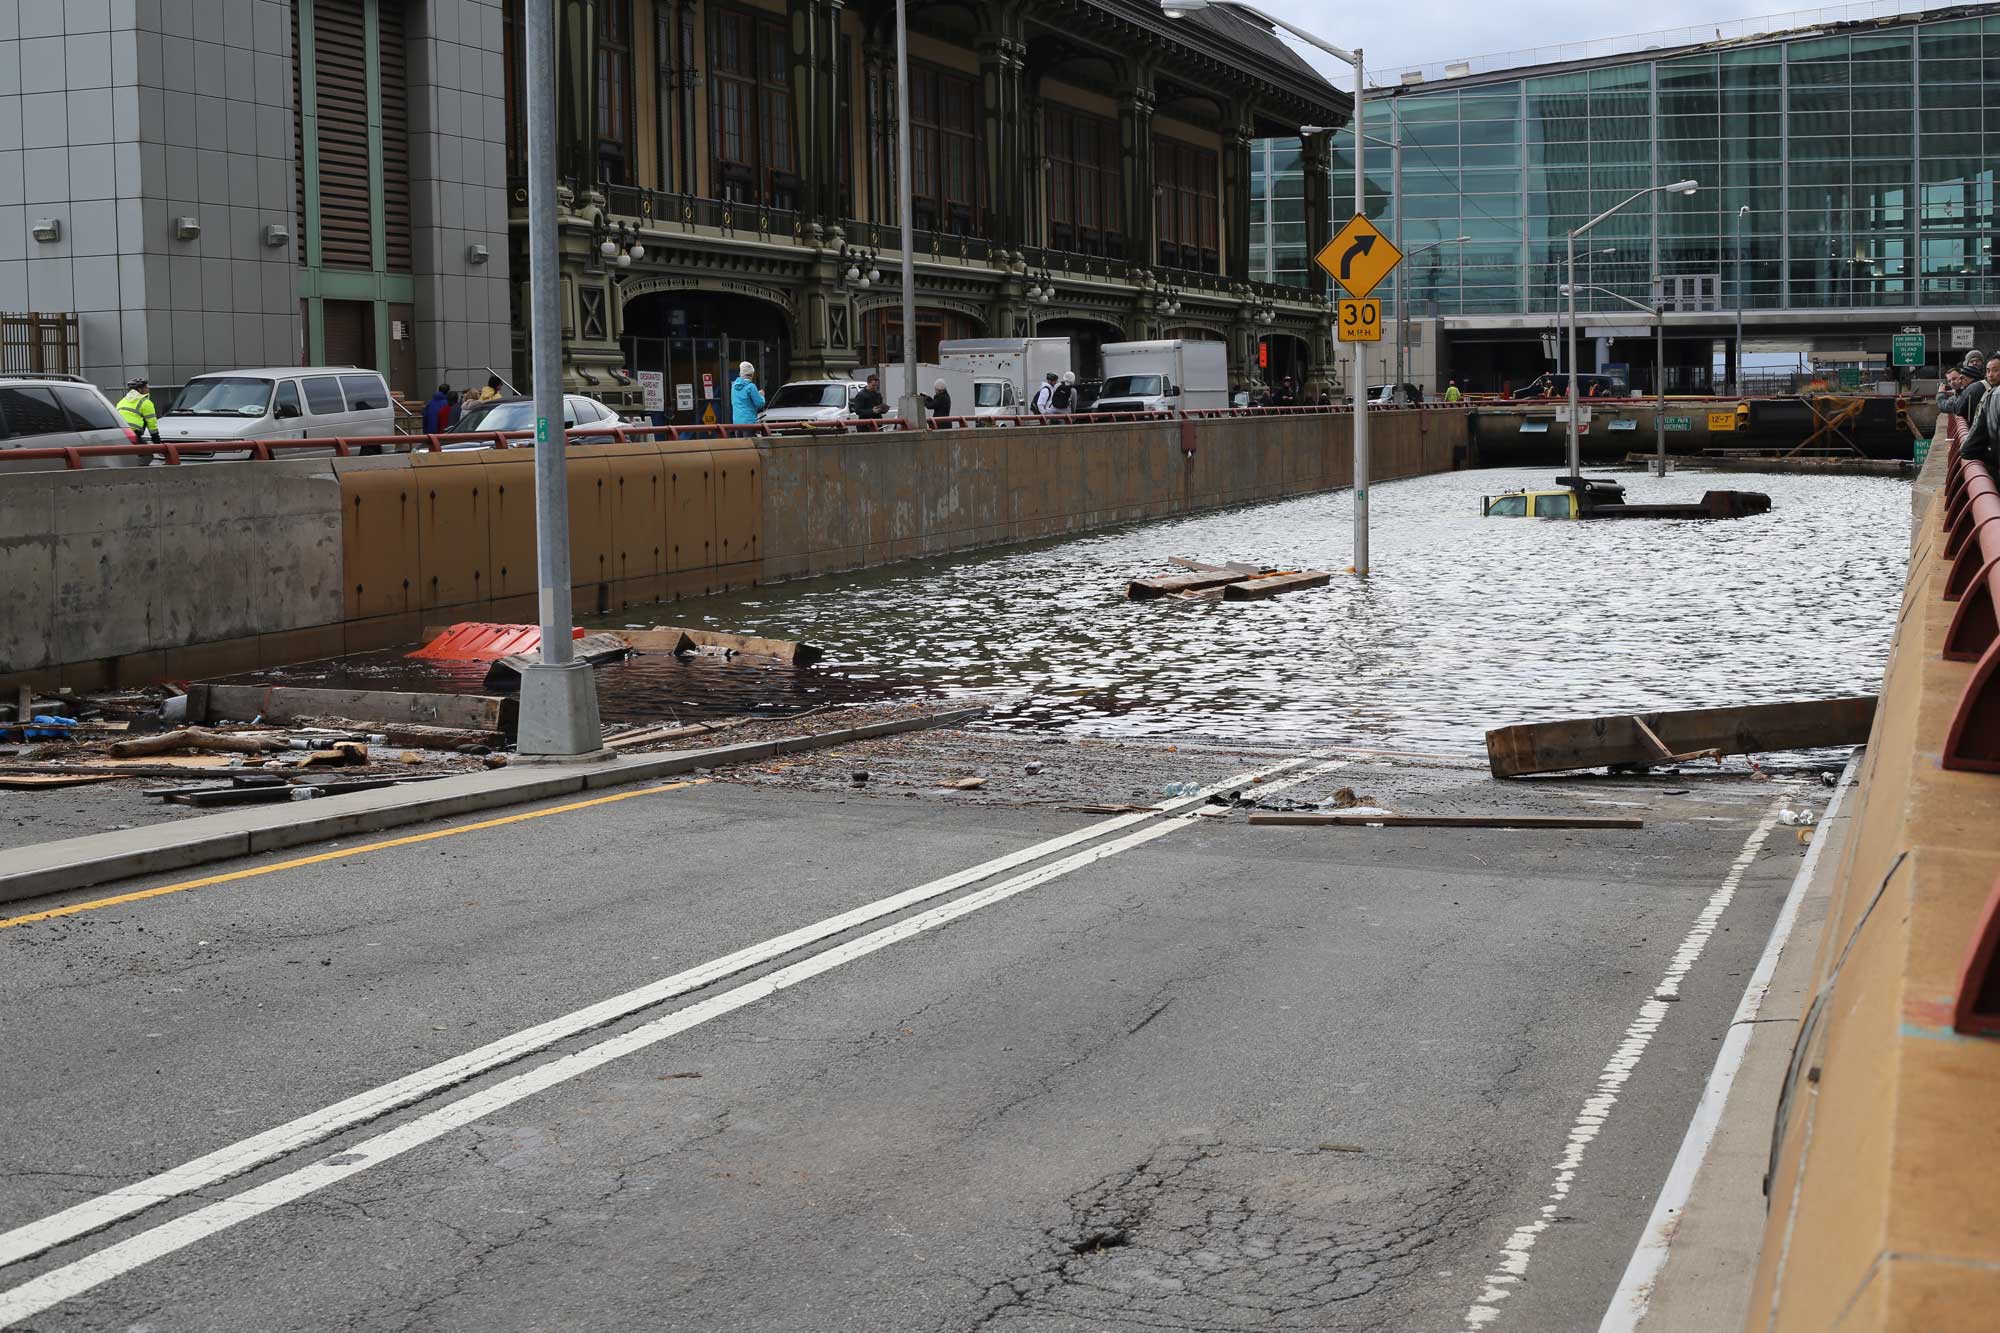 Photograph showing the flooded Battery Park Tunnel in Manhattan, New York City, following Hurricane Sandy in 2021. The photo shows the entrance to the tunnel completely blocked by standing water. The two-lane road disappears into the water.